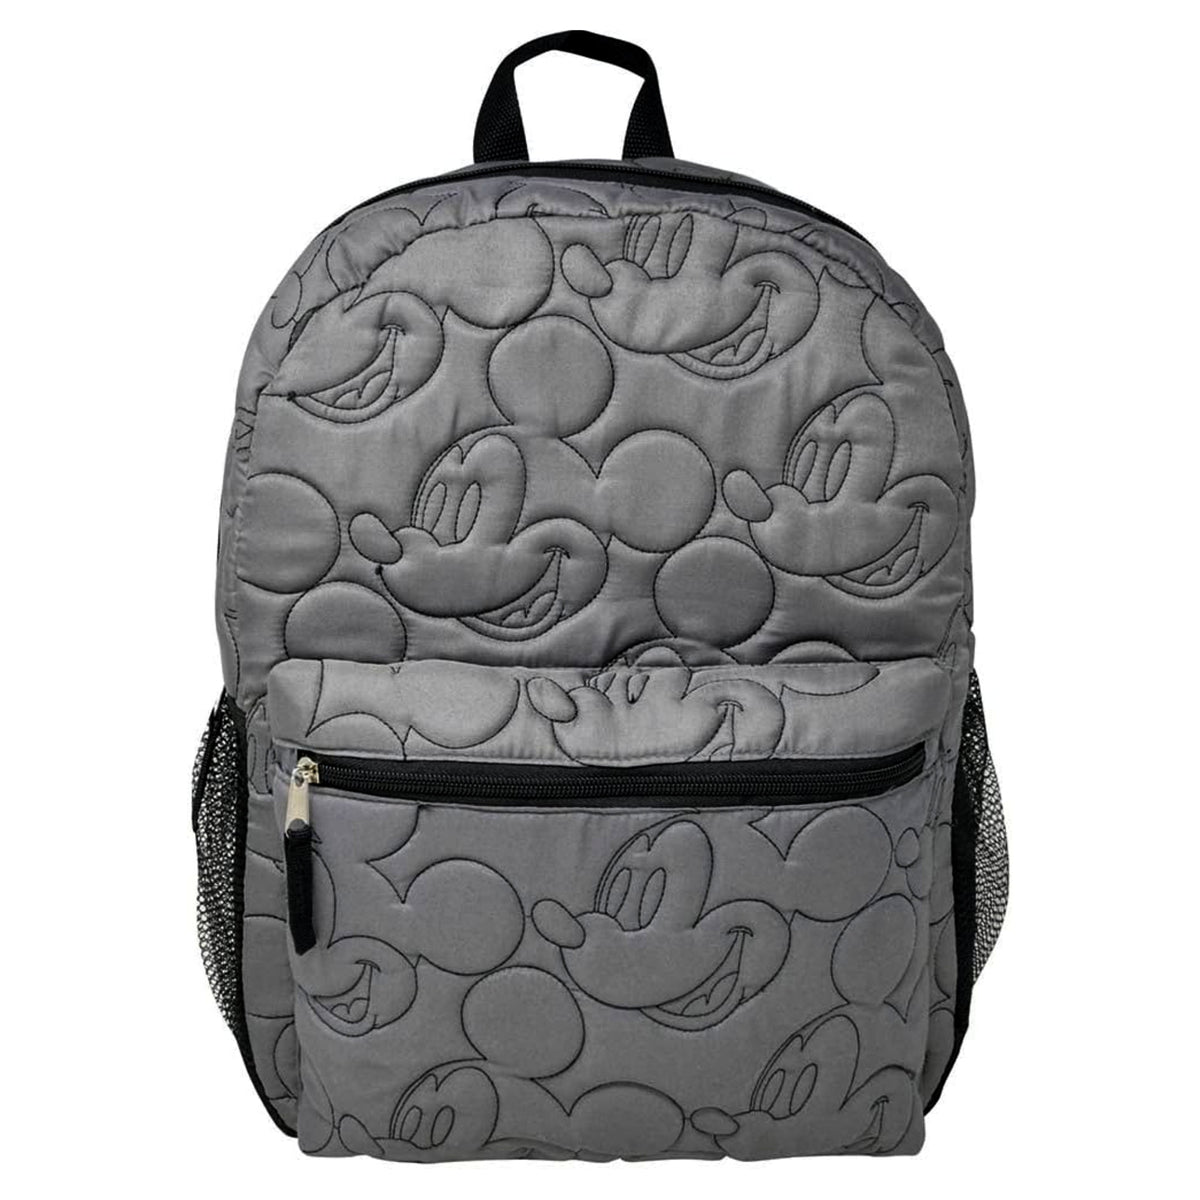 Disney Mickey Mouse Embroidered Nylon Backpack